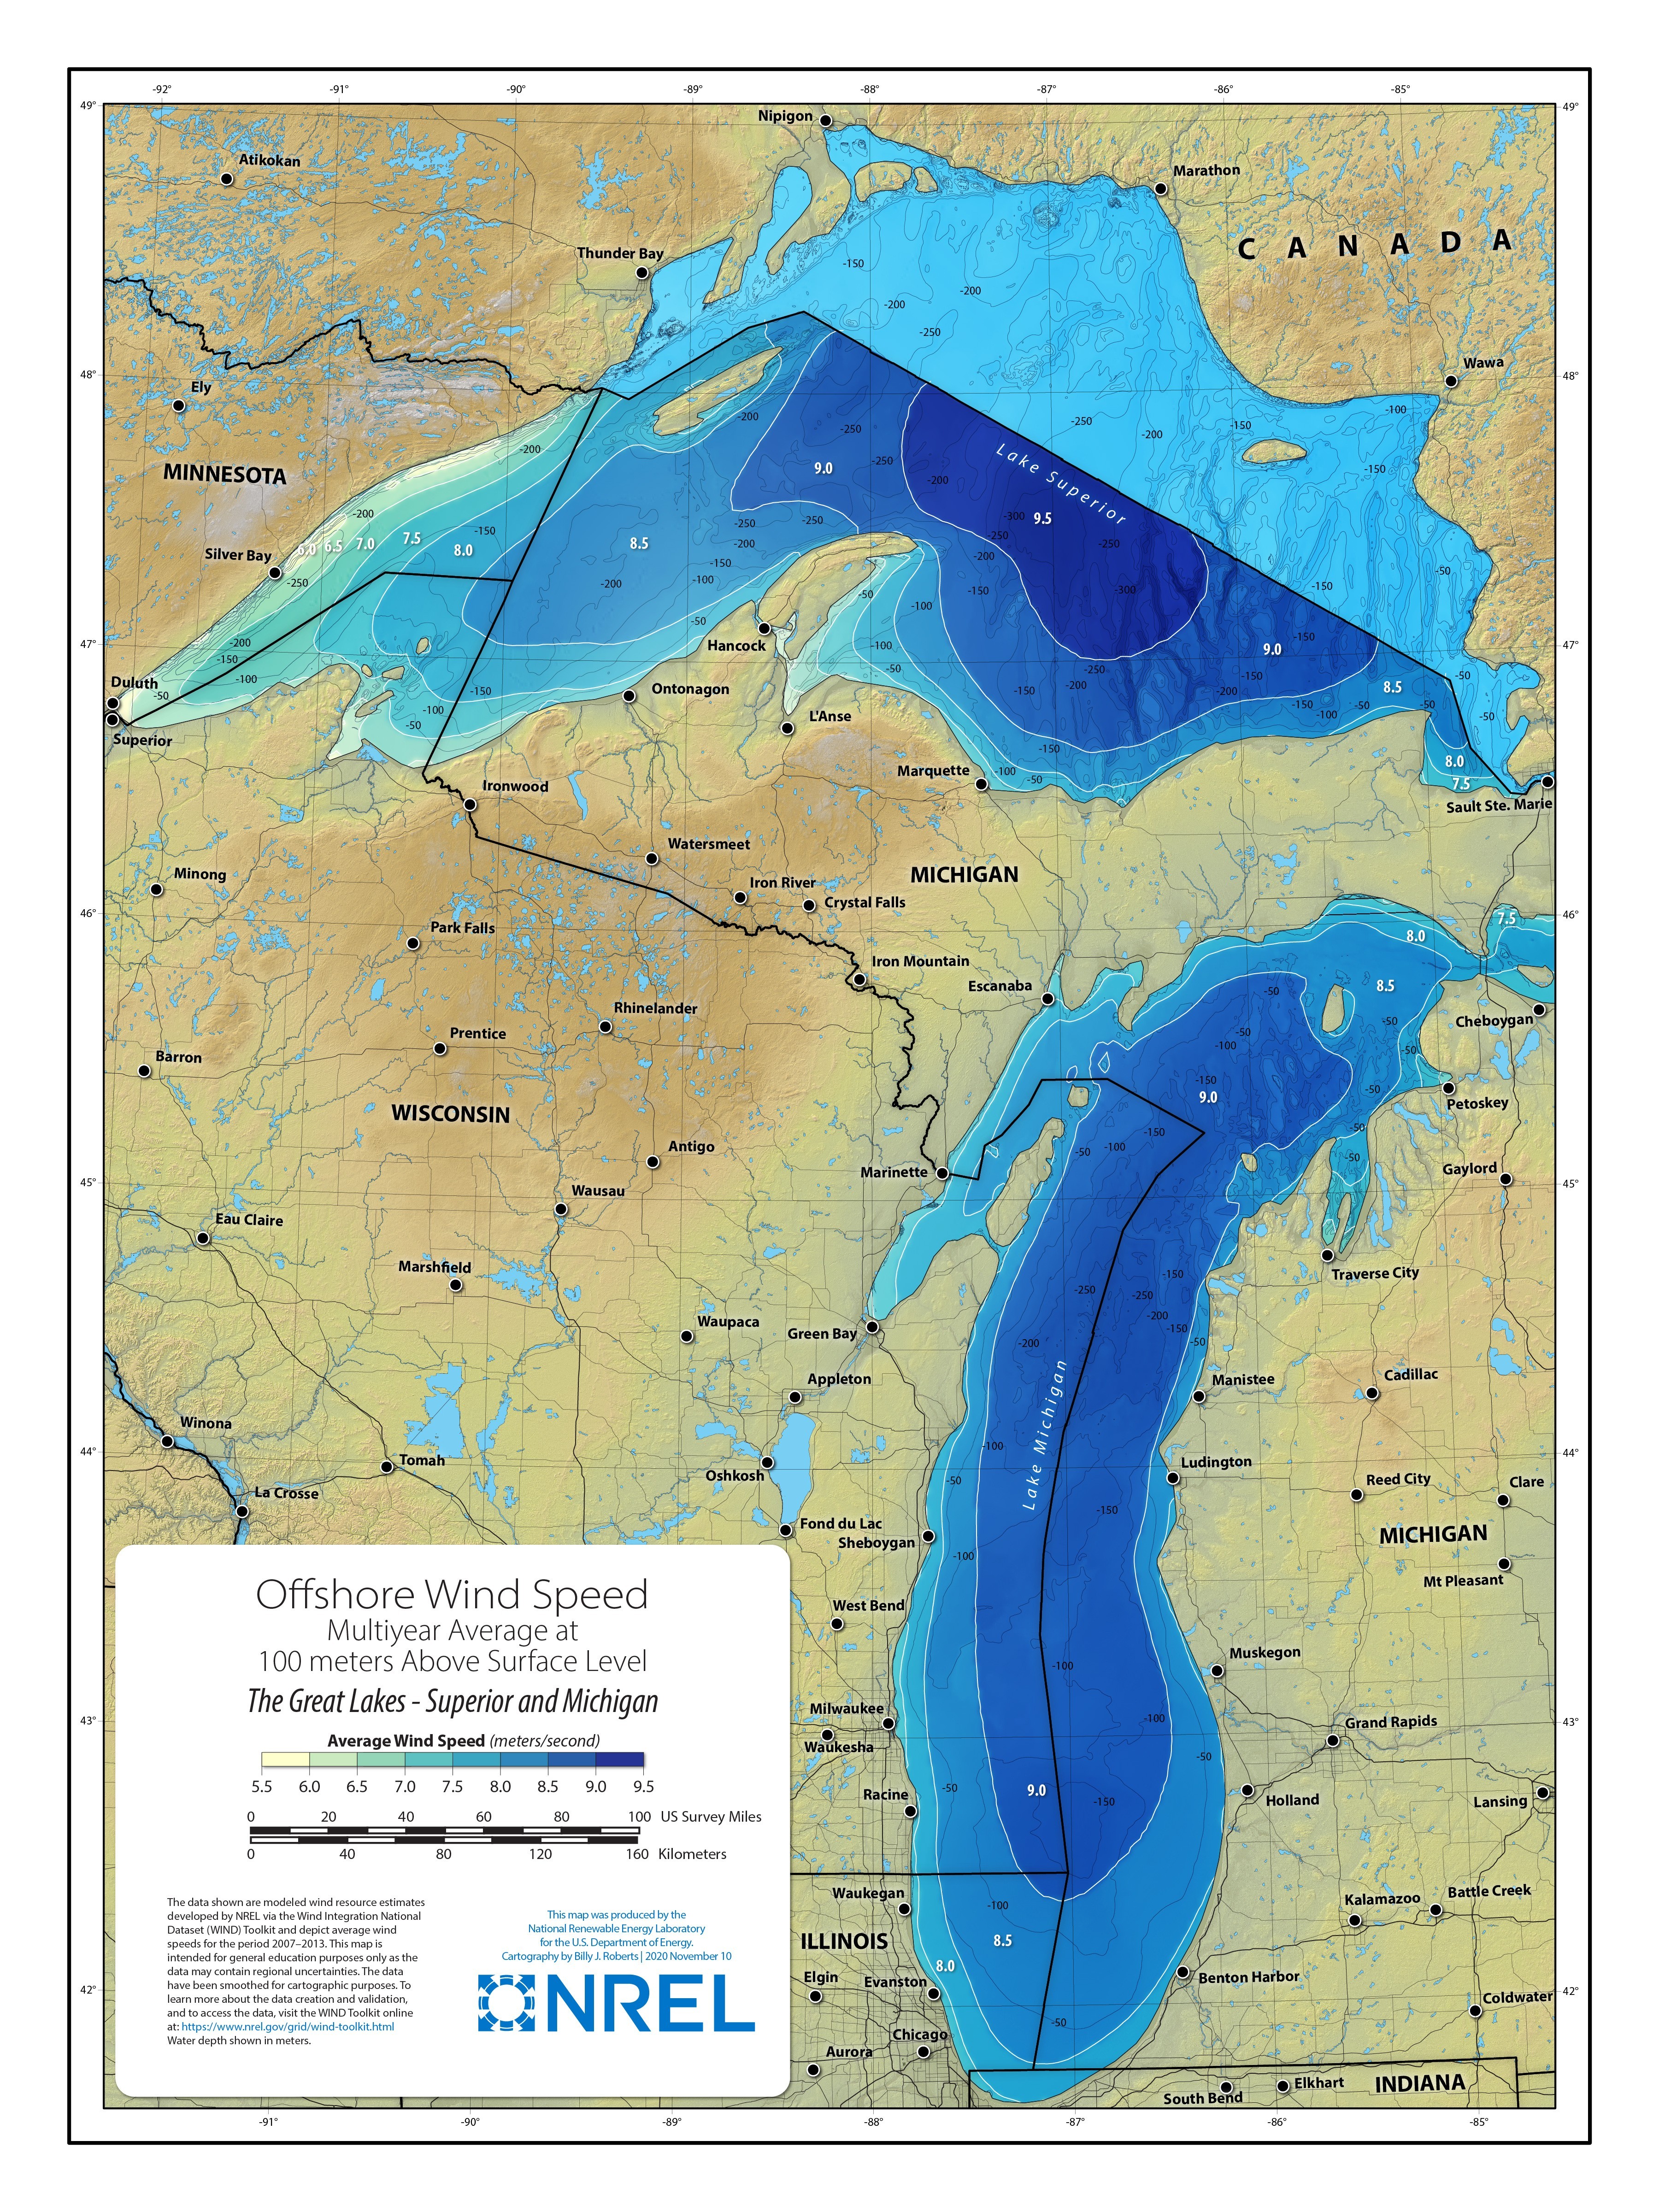 Great Lakes Offshore Wind Speed at 100 Meters | Lake Superior and Lake Michigan